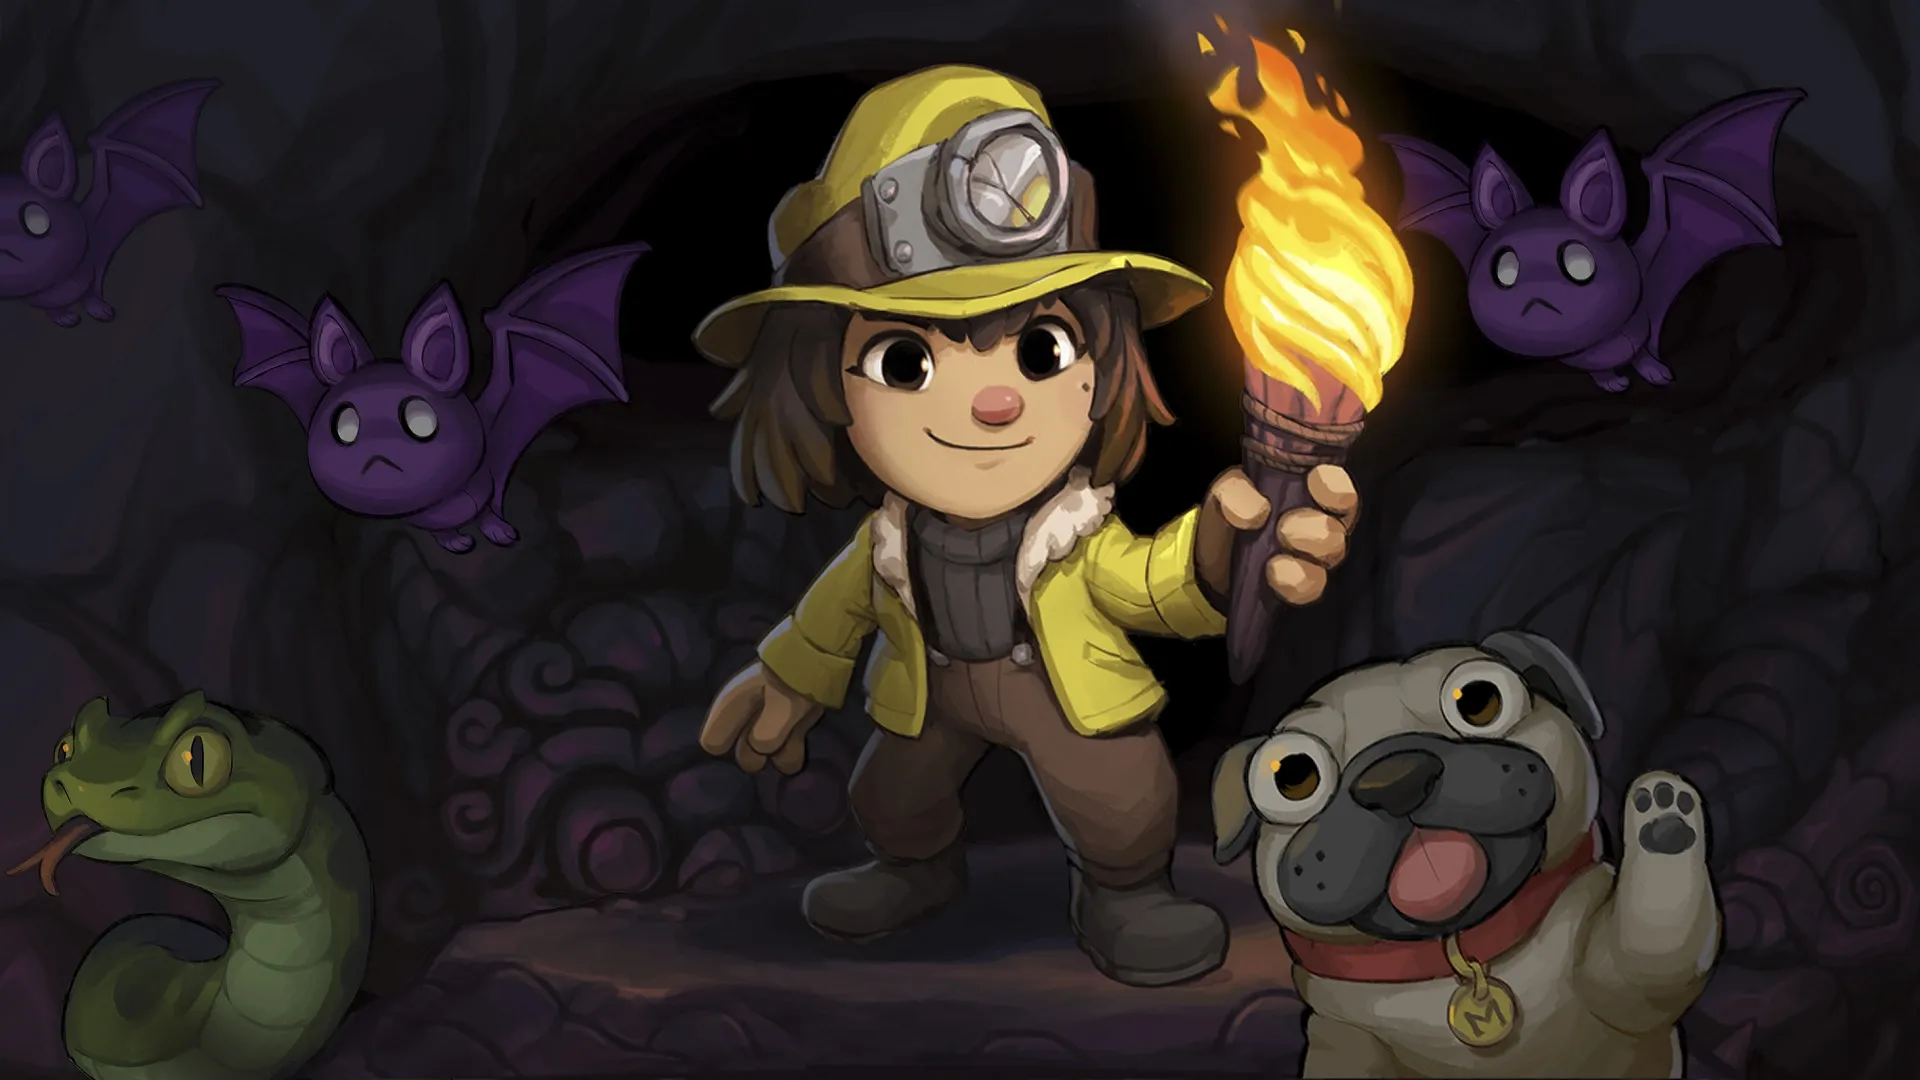 Spelunky 2 guide: How to find the Black Market and get the Hedjet